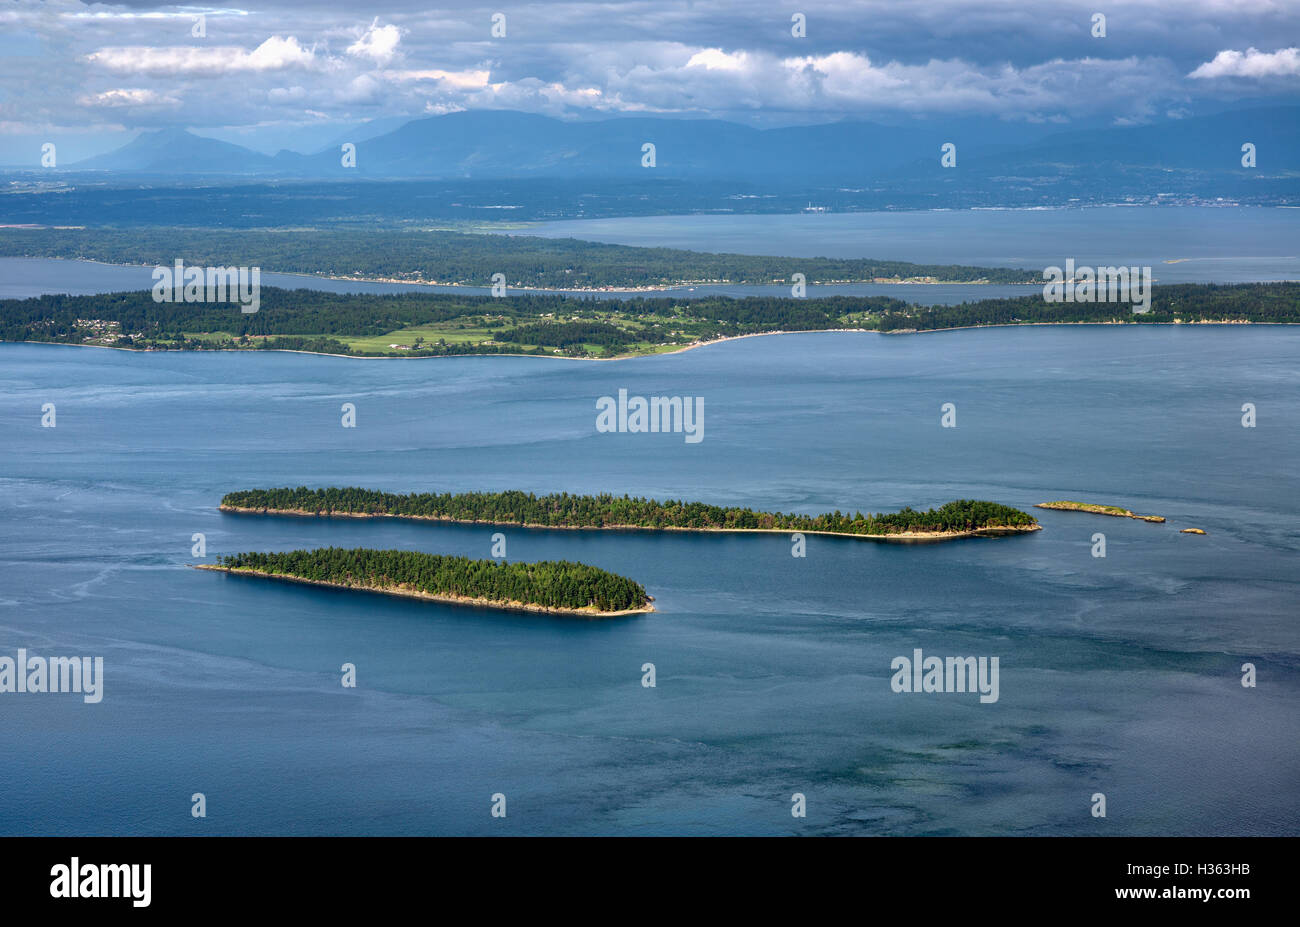 USA; Washington; San Juan Islands; Orcas Island; View east from Mount Constitution at towards islands and distant mainland. Stock Photo